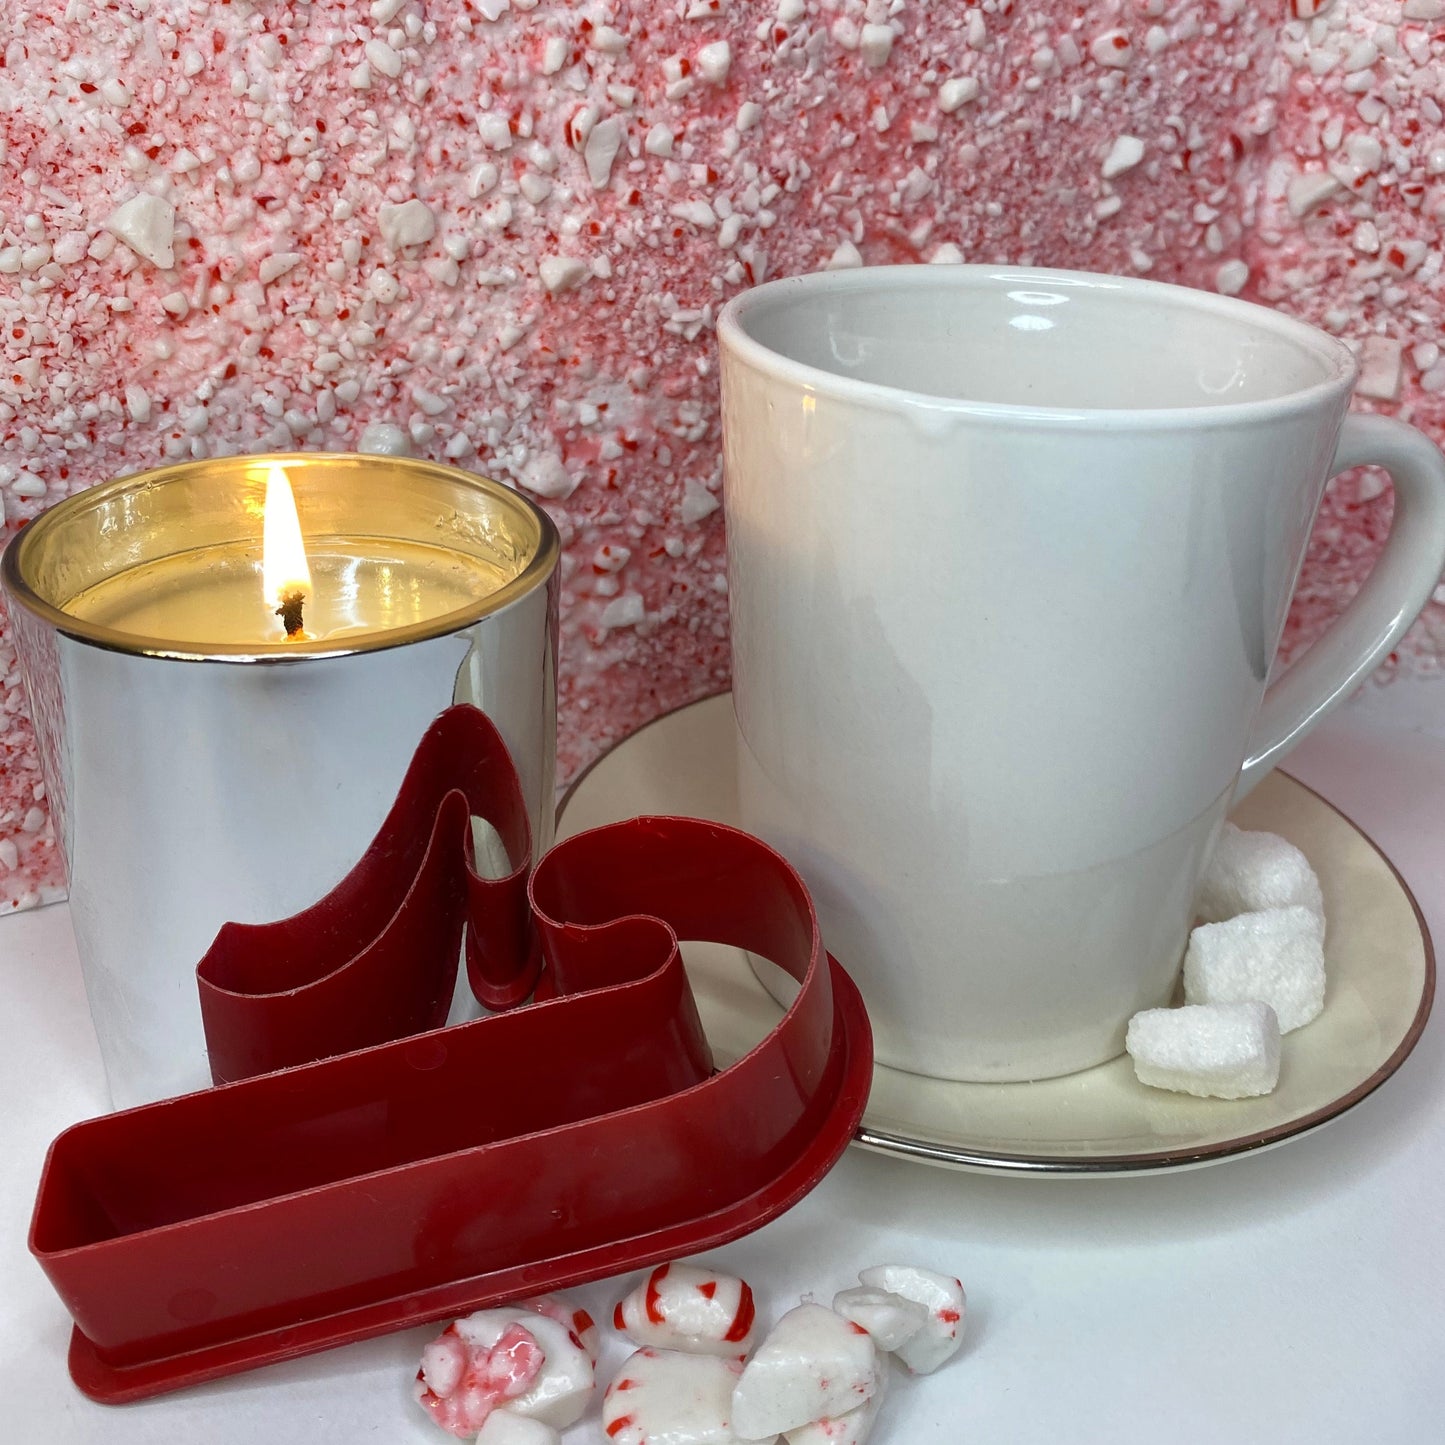 Candy Cane Scent Candle - Eco-Friendly 8 oz.